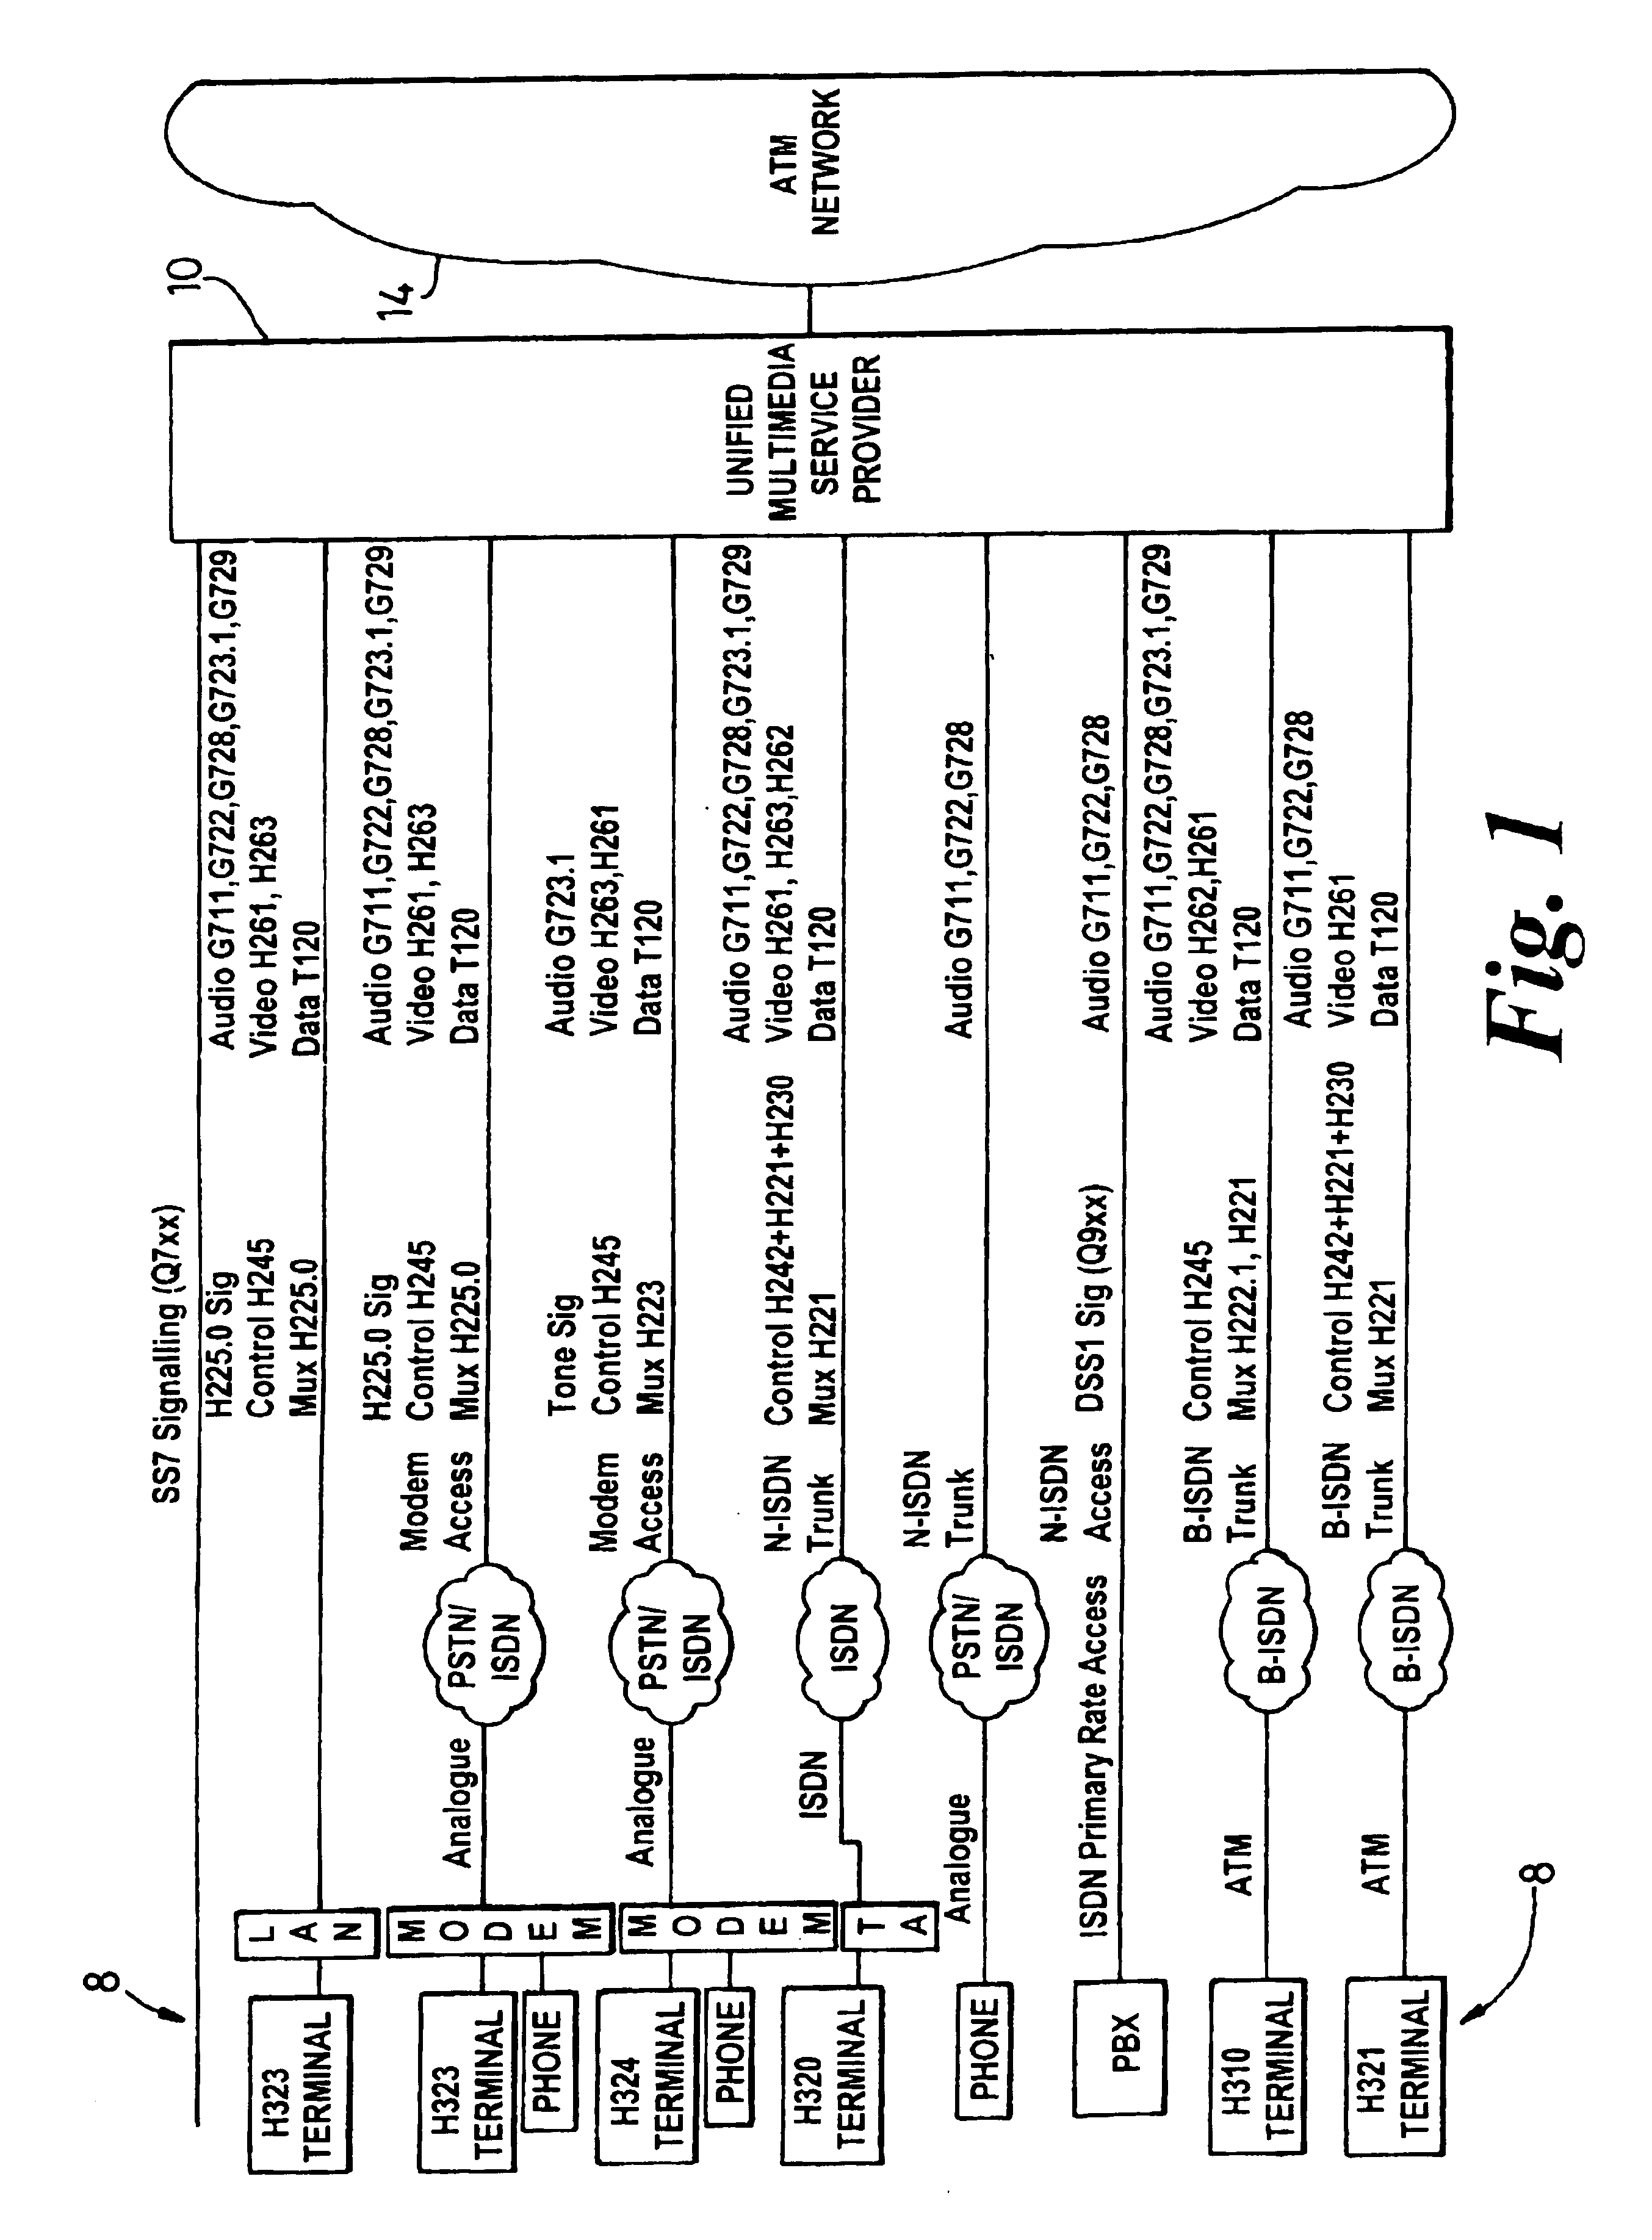 Communications method and apparatus